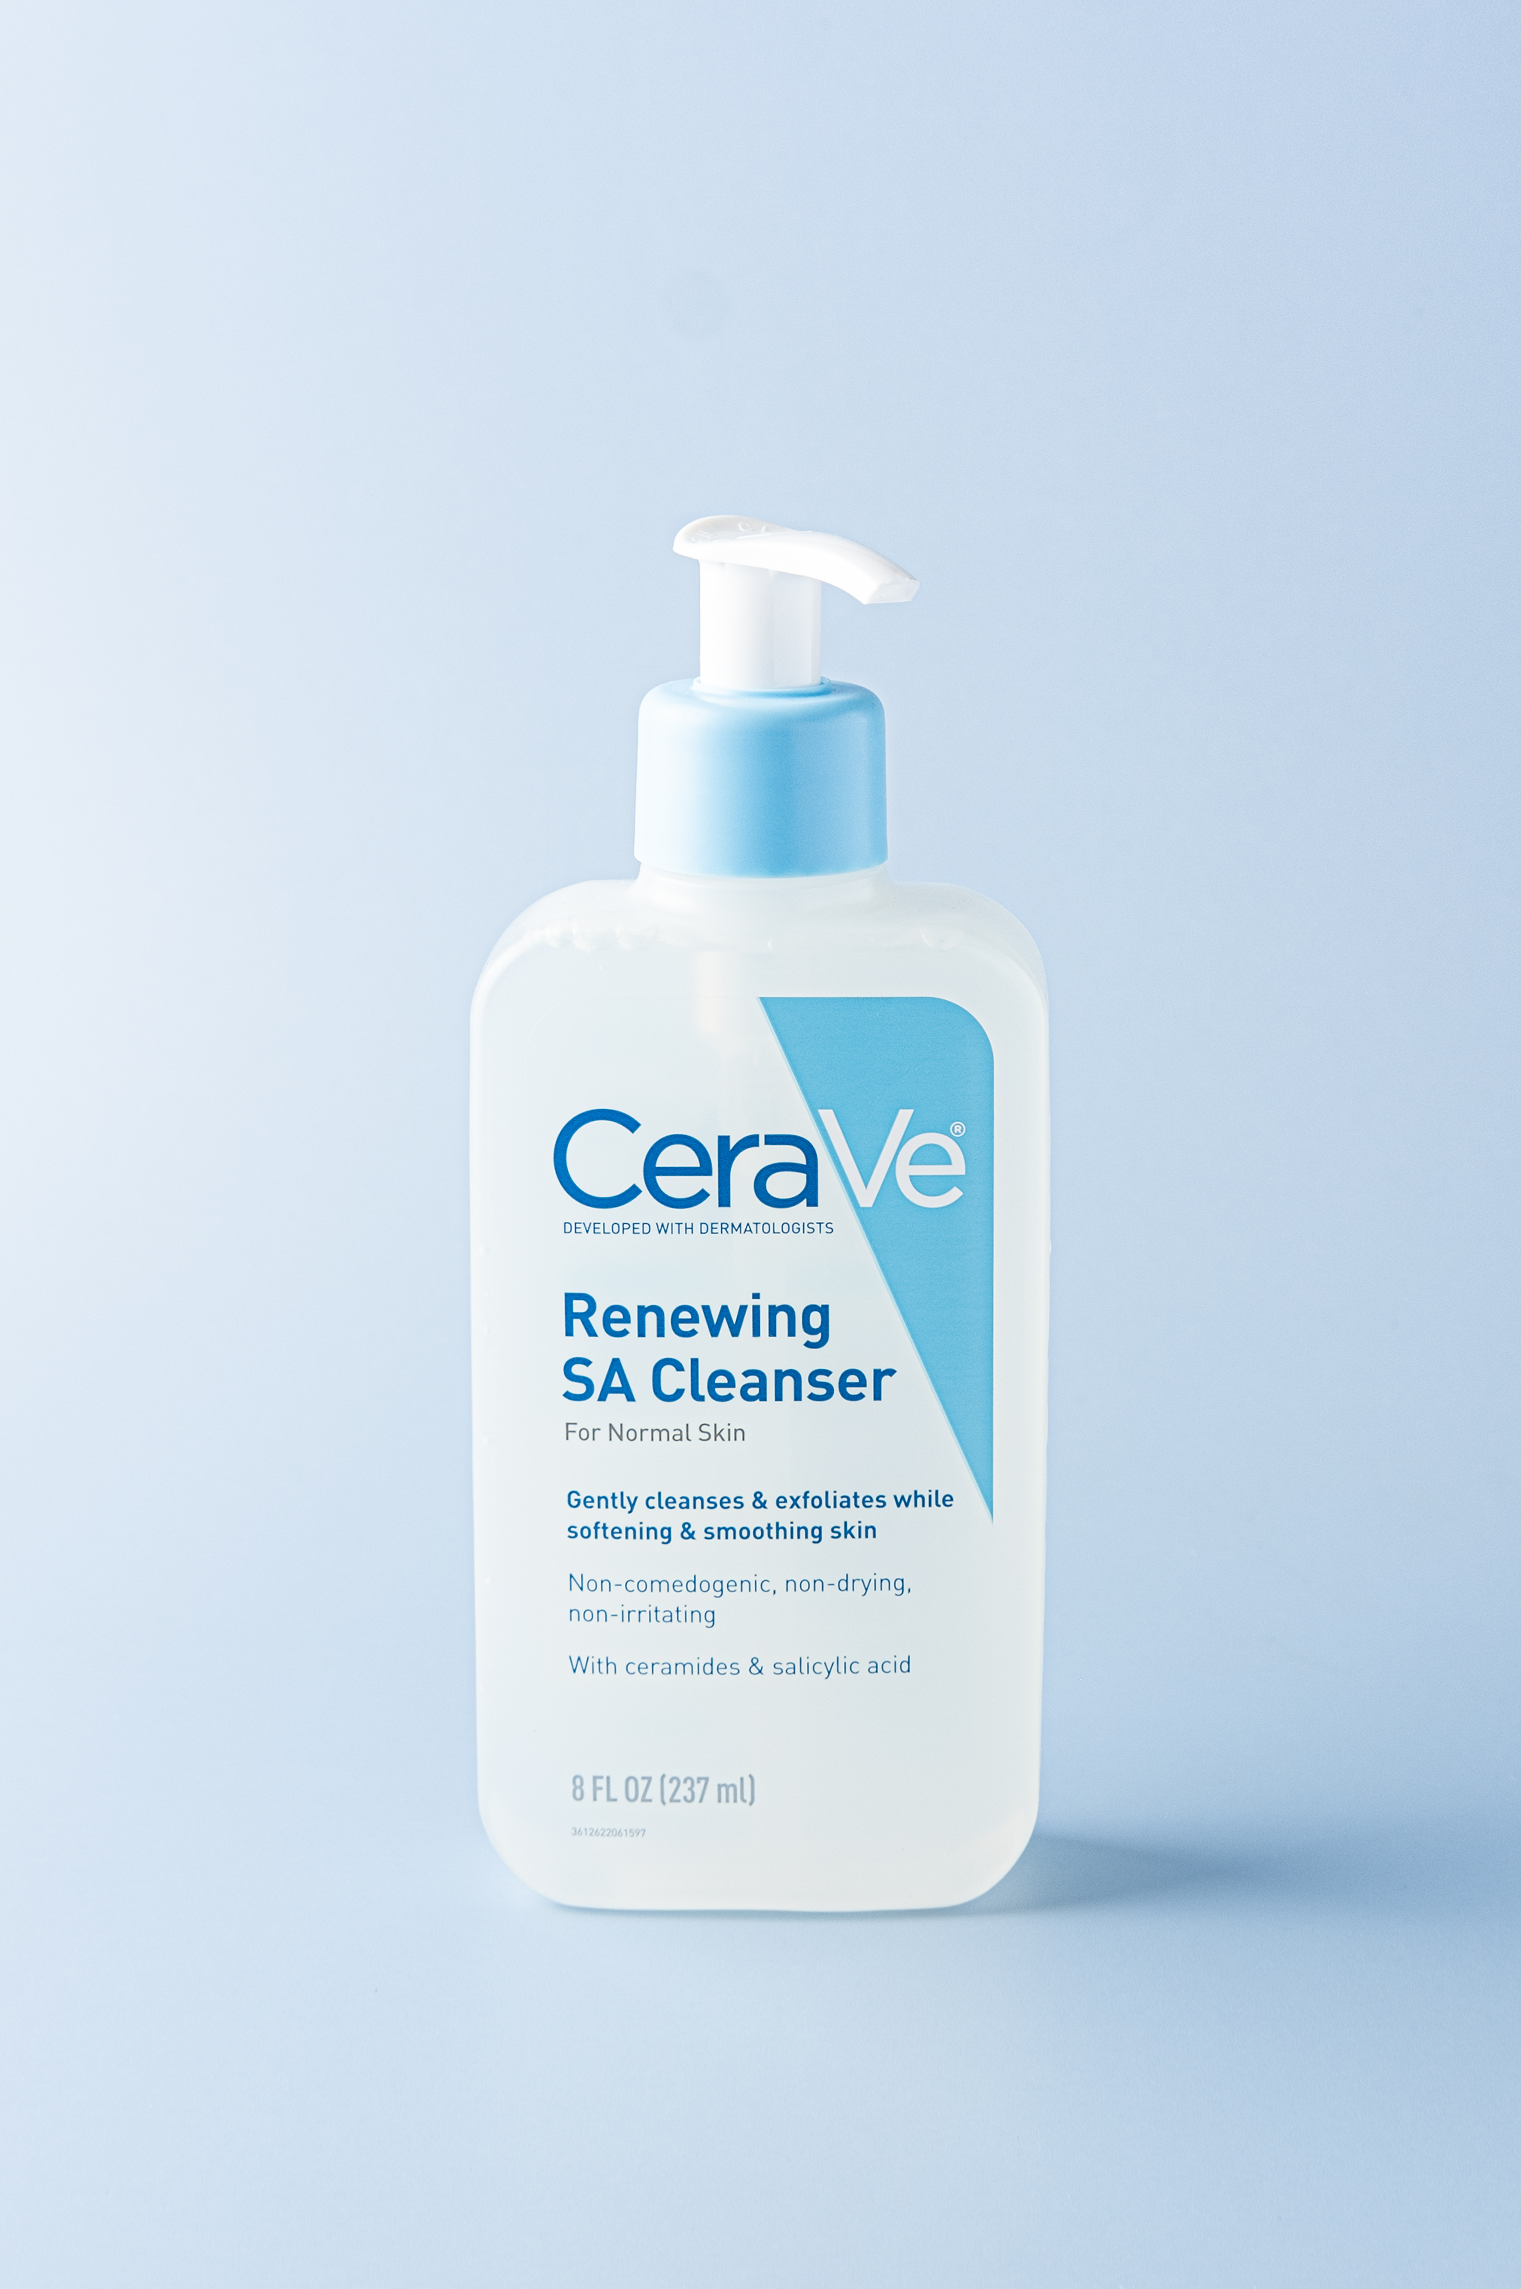 CeraVe Renewing SA (Salicylic Acid) Cleanser Philippines